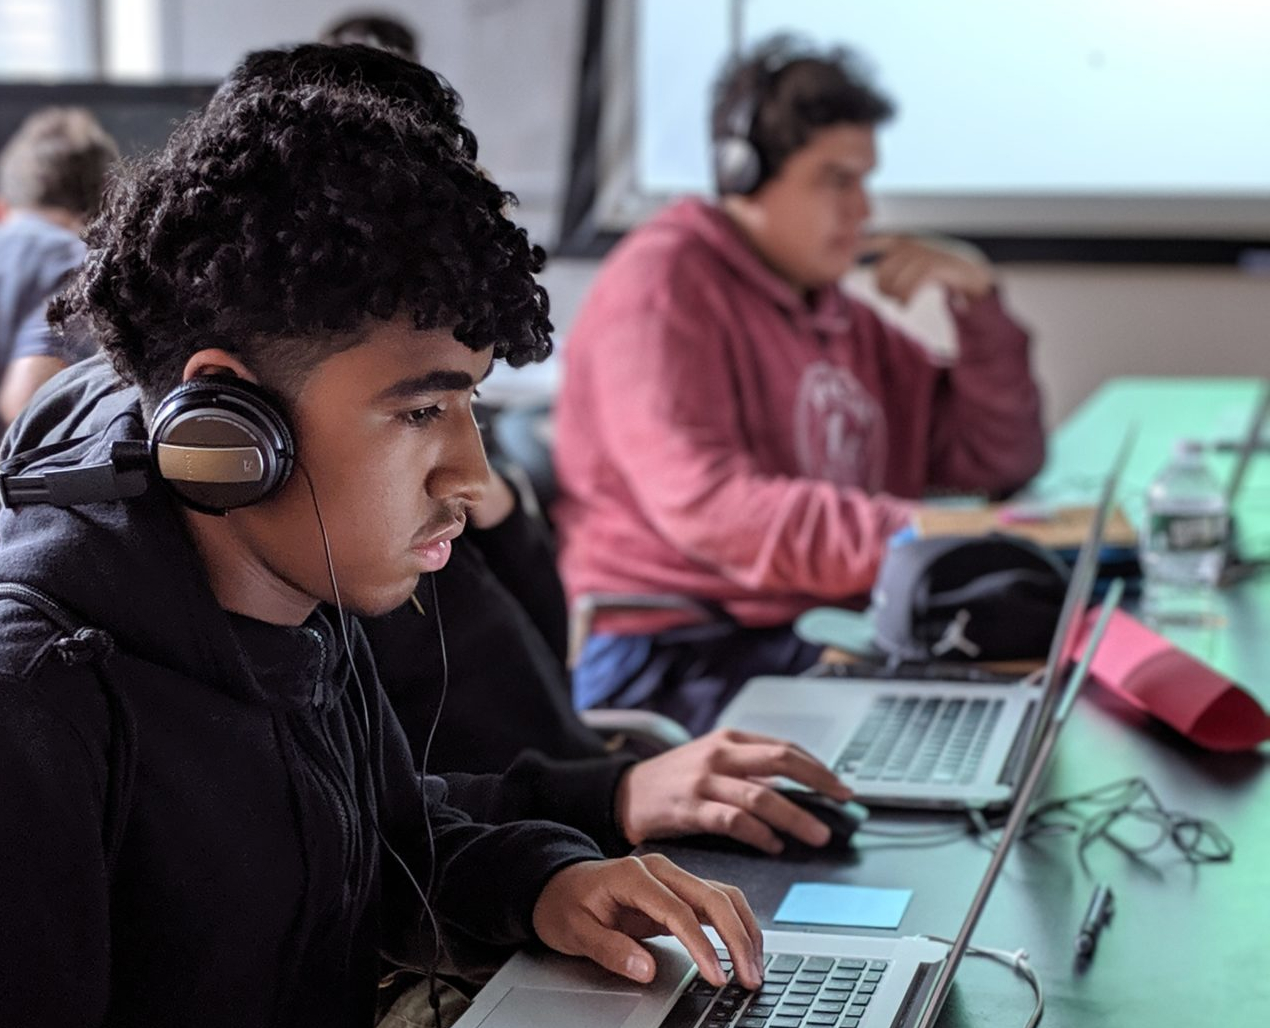 A student sitting at a laptop with headphones around his ears, surrounded by other students deep in thought. He is black, with short, curly hair, wearing a black hoodie.